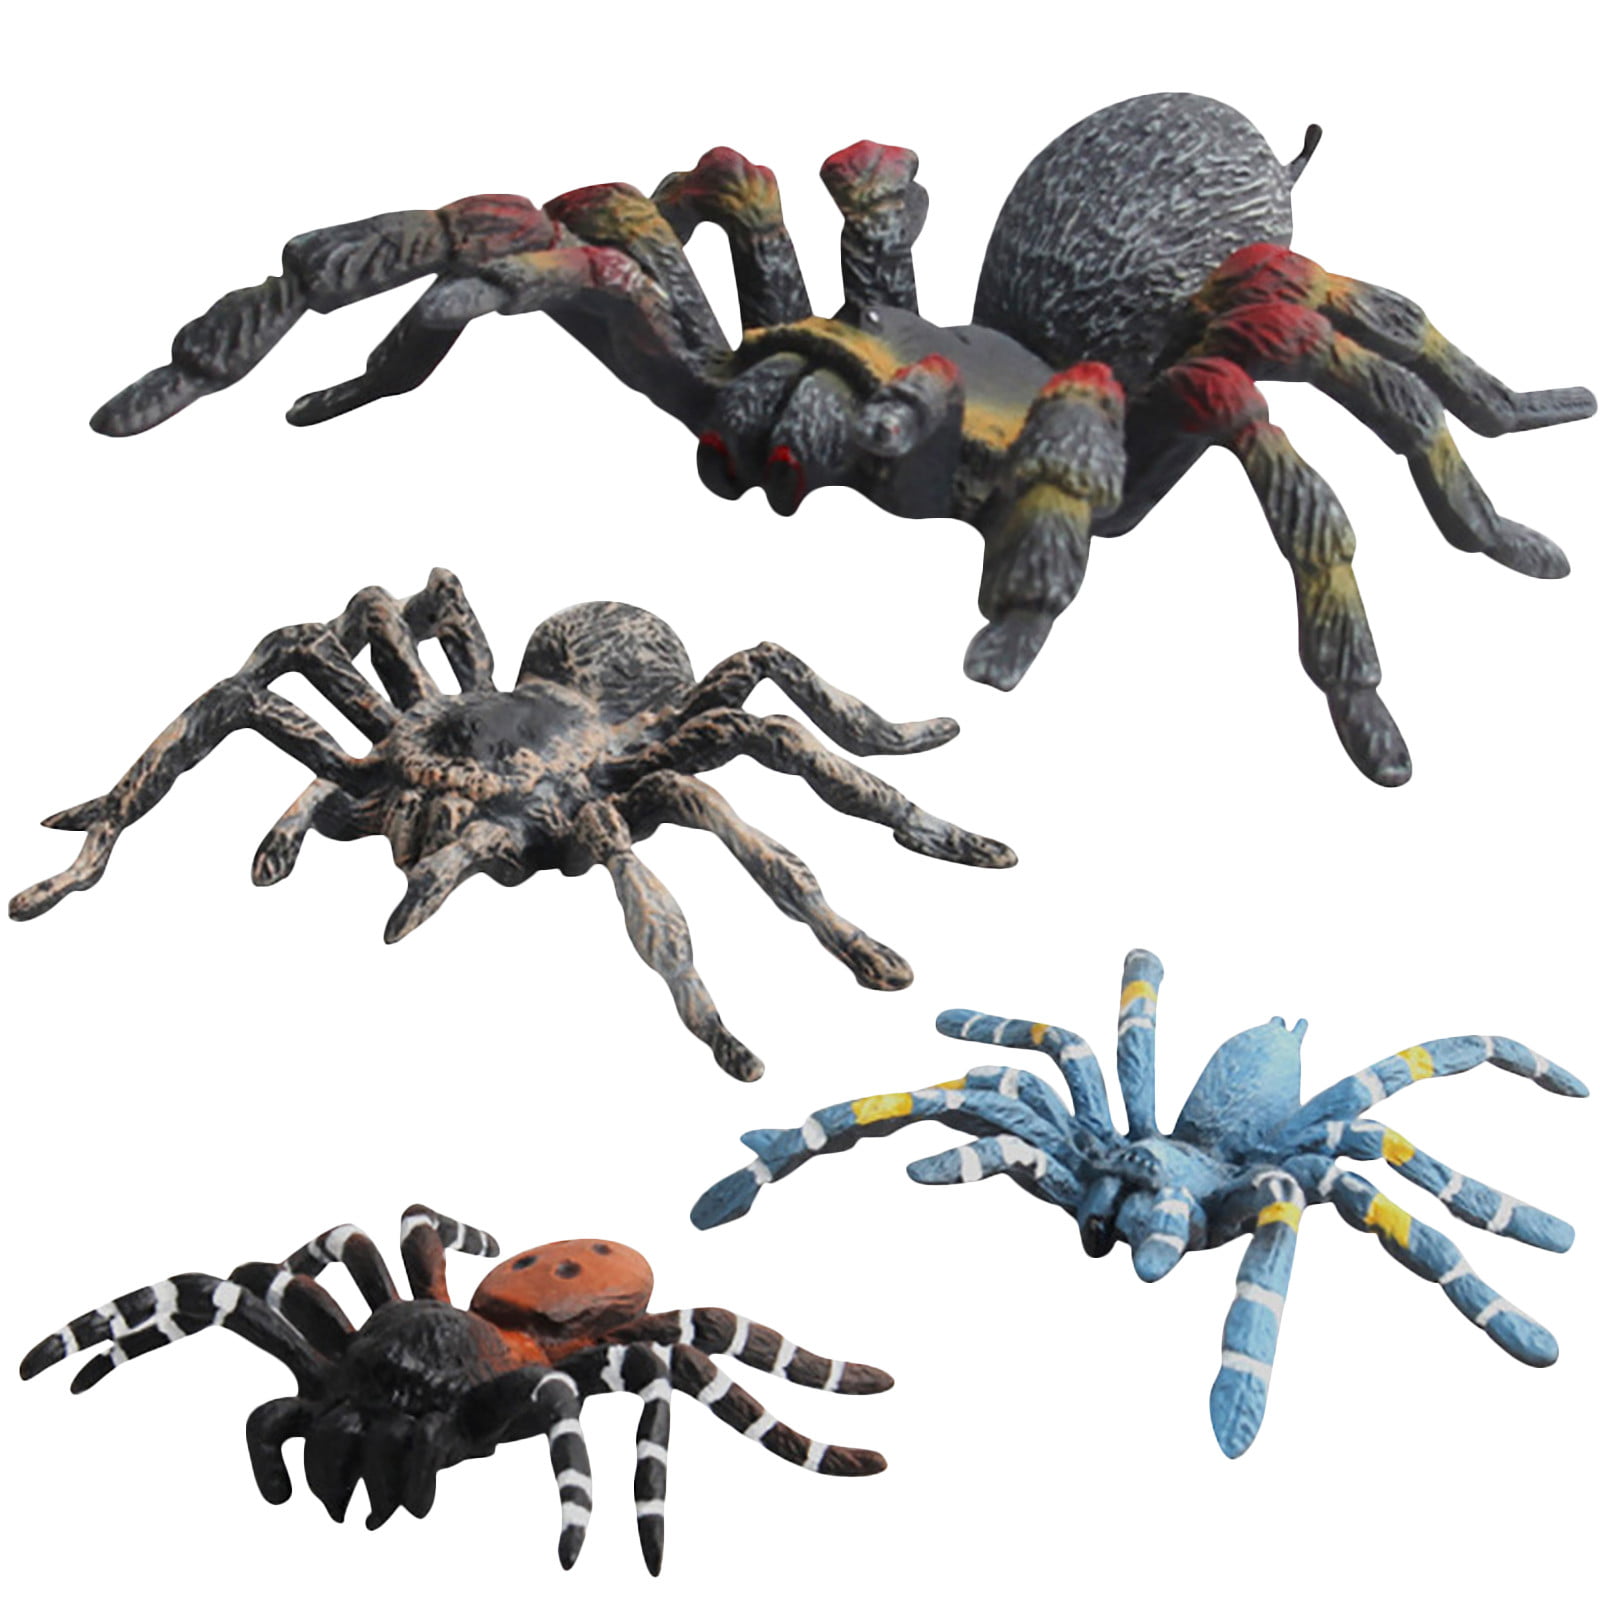 Plastic Simulation Wild Insect Spider Animal Model For Kids Child Leaning Toy 